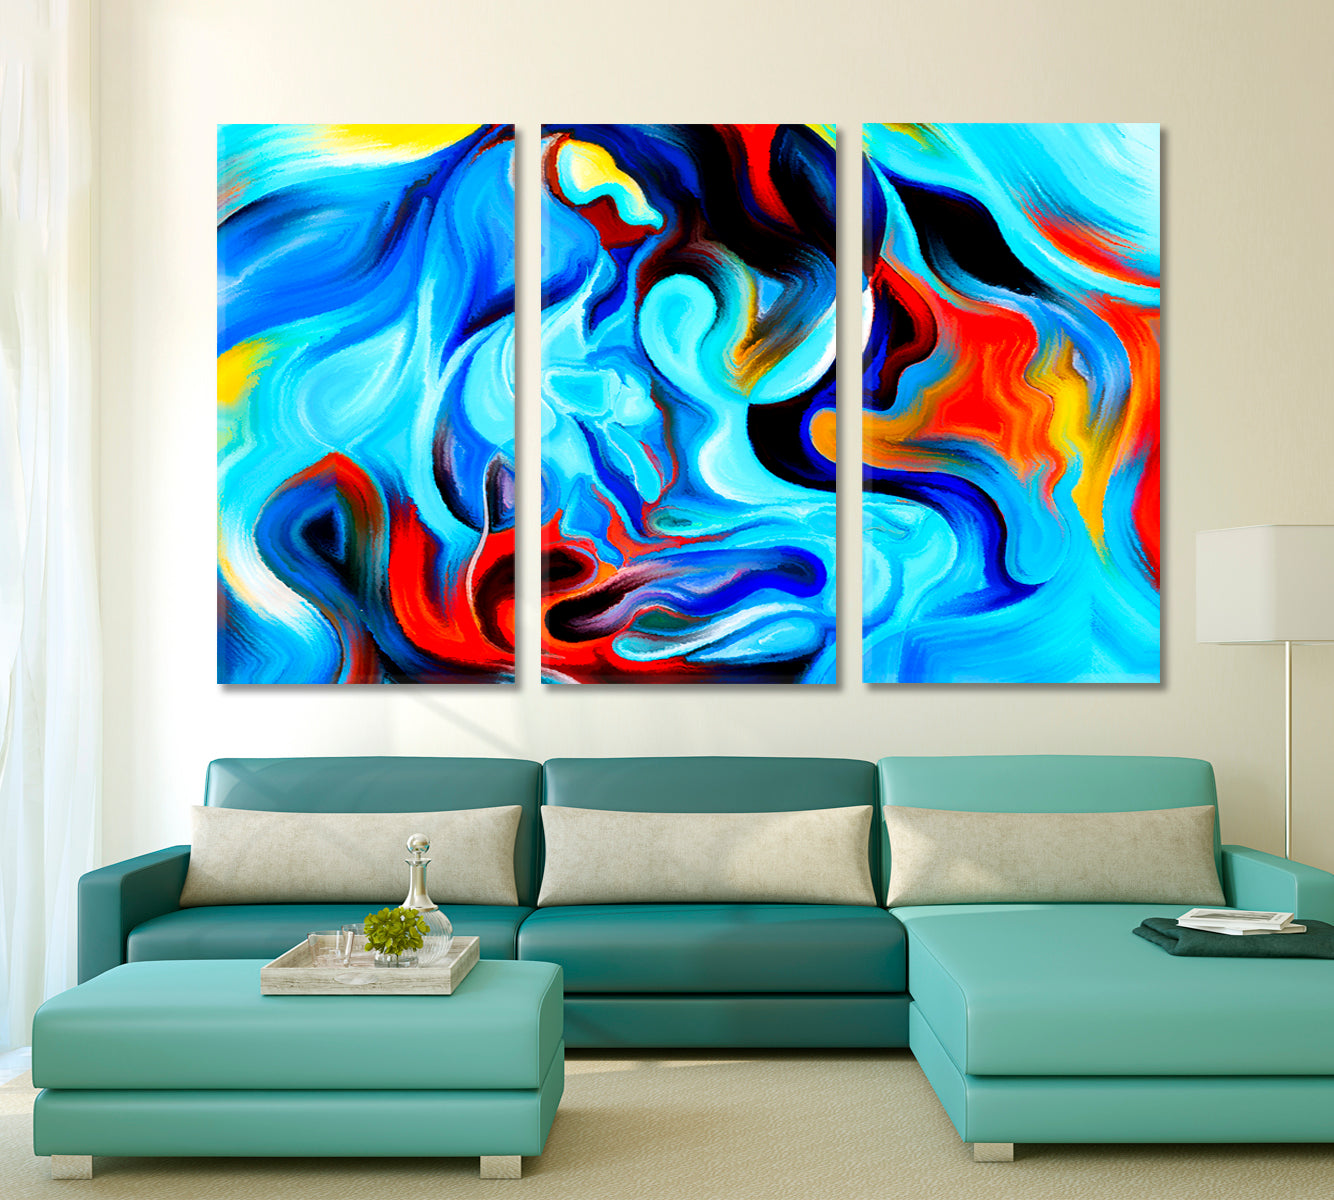 Color And Motion Abstract Art Print Artesty 3 panels 36" x 24" 